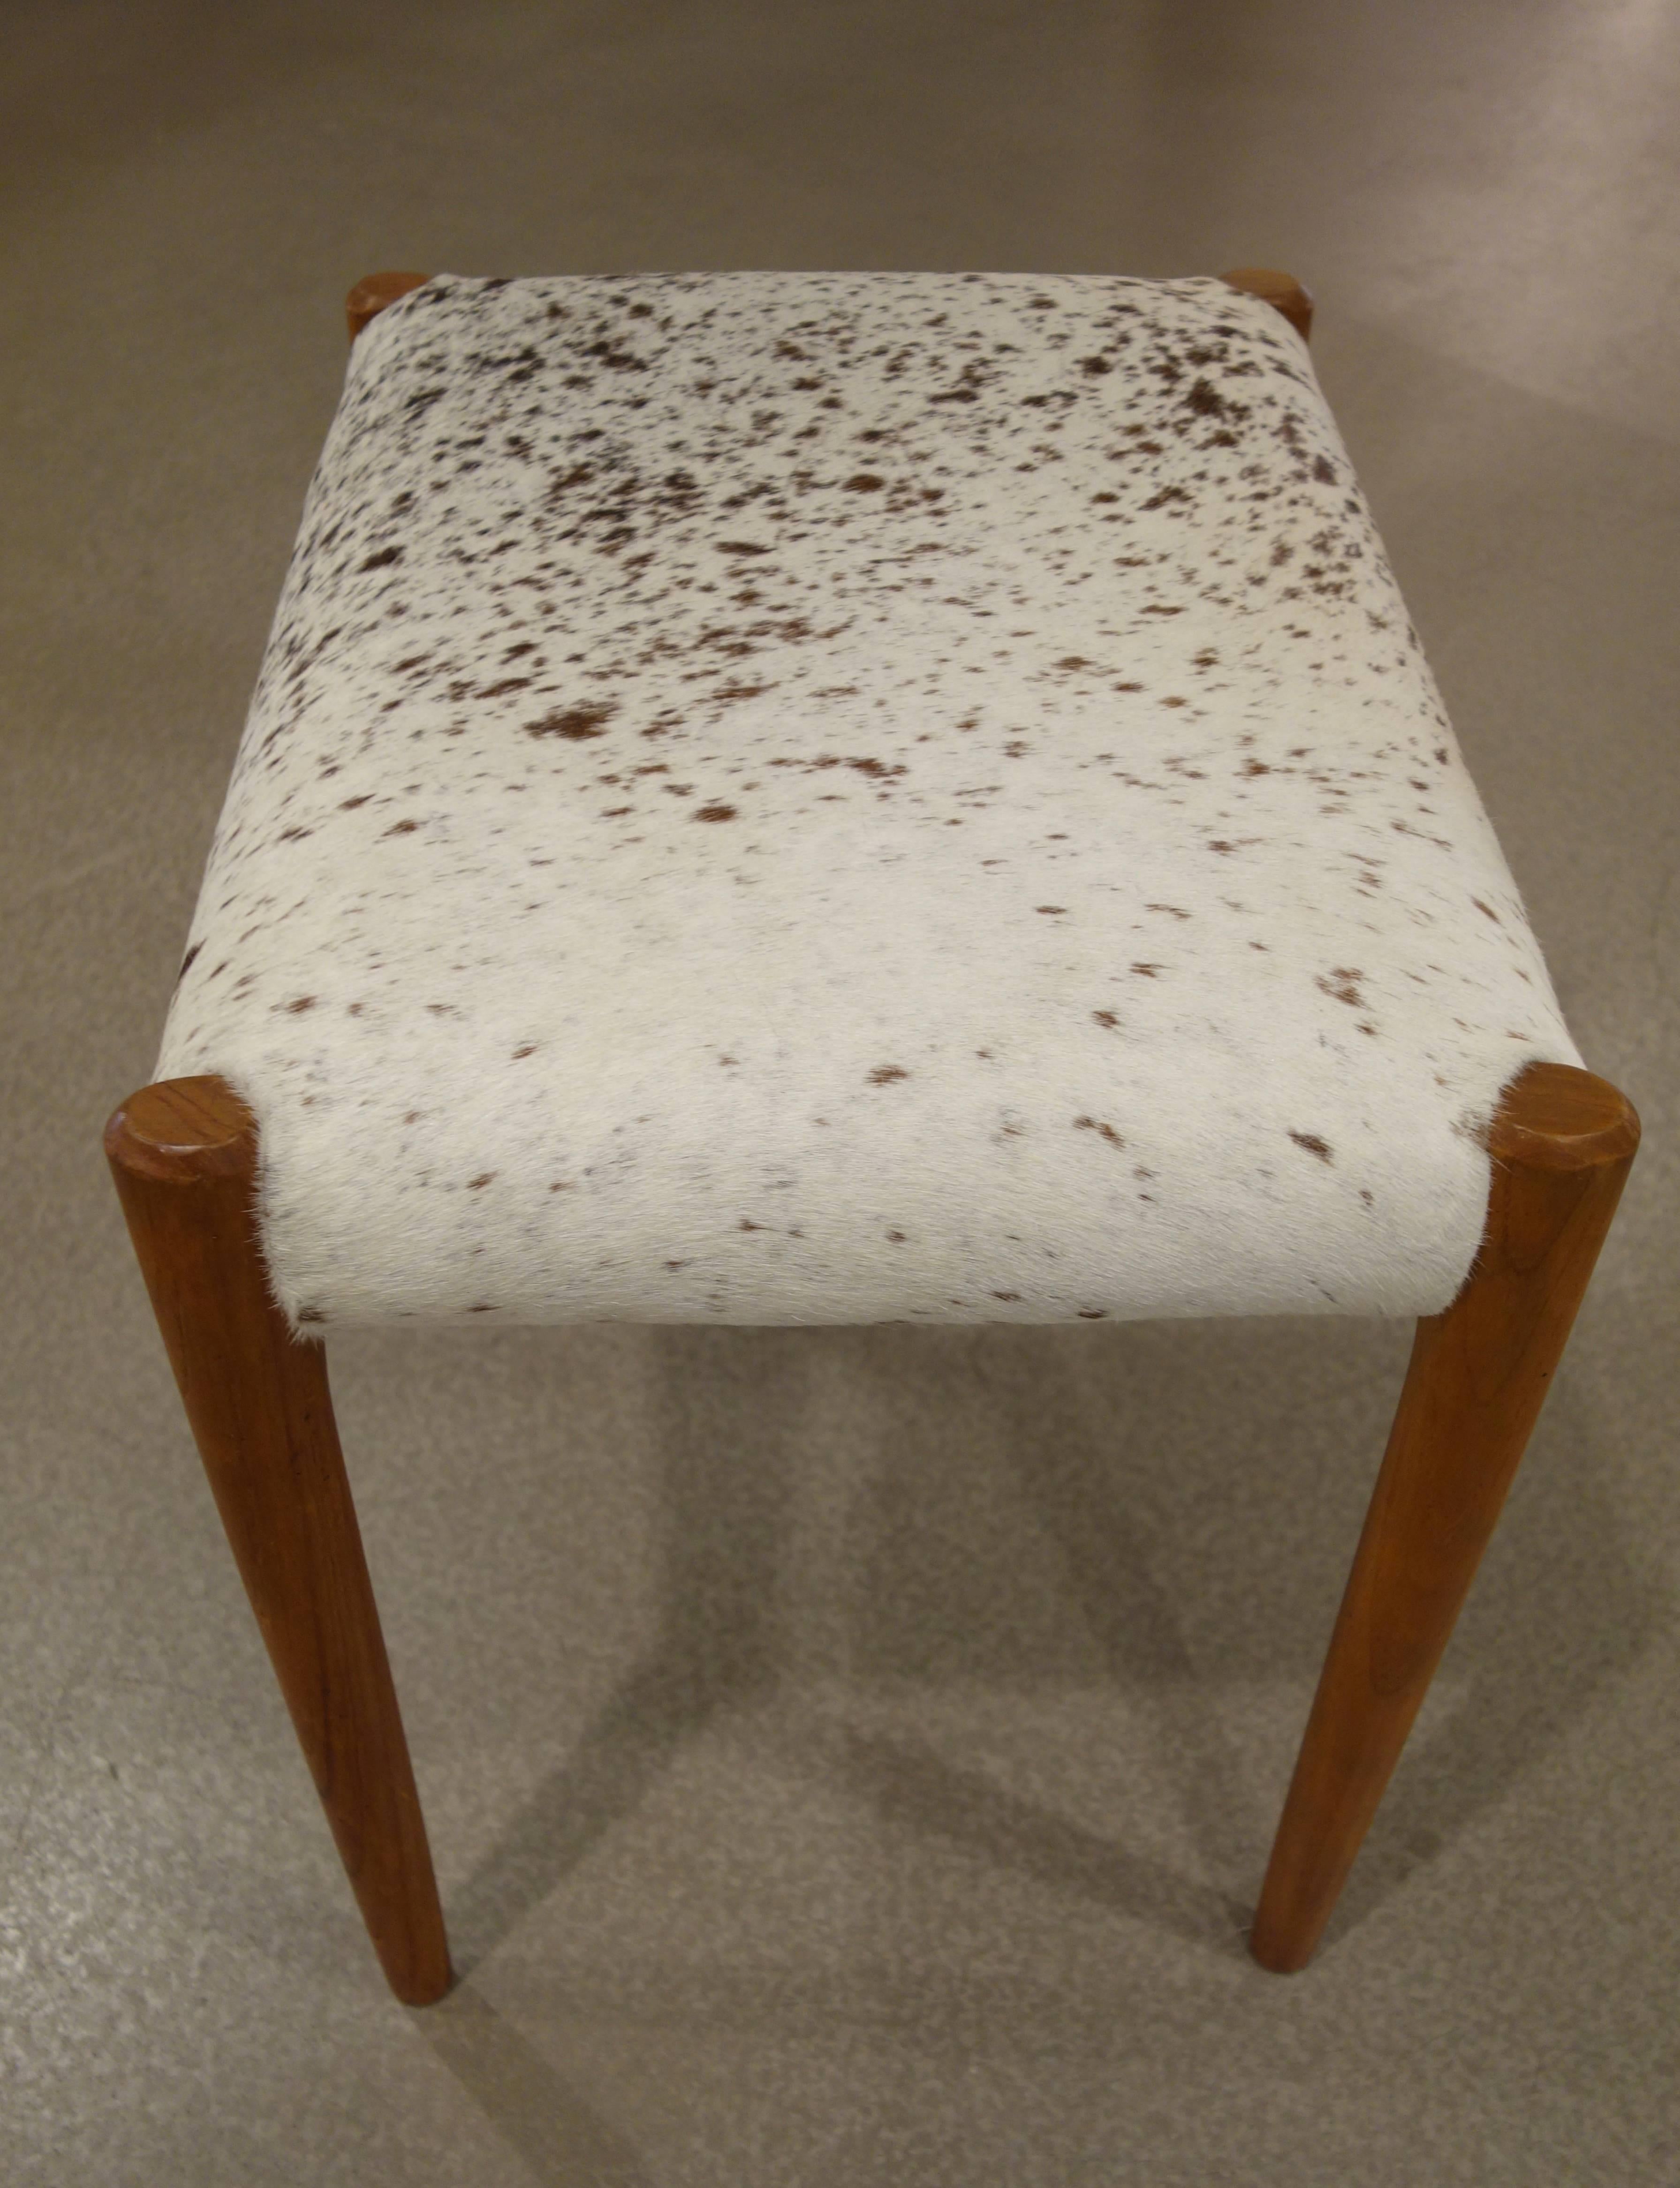 A pair of Mid-Century Danish stools by Niels O. Moller for J.L. Moller with tight newly upholstered seats in whiskey brown and white cowhide resting on honey colored teak wood.